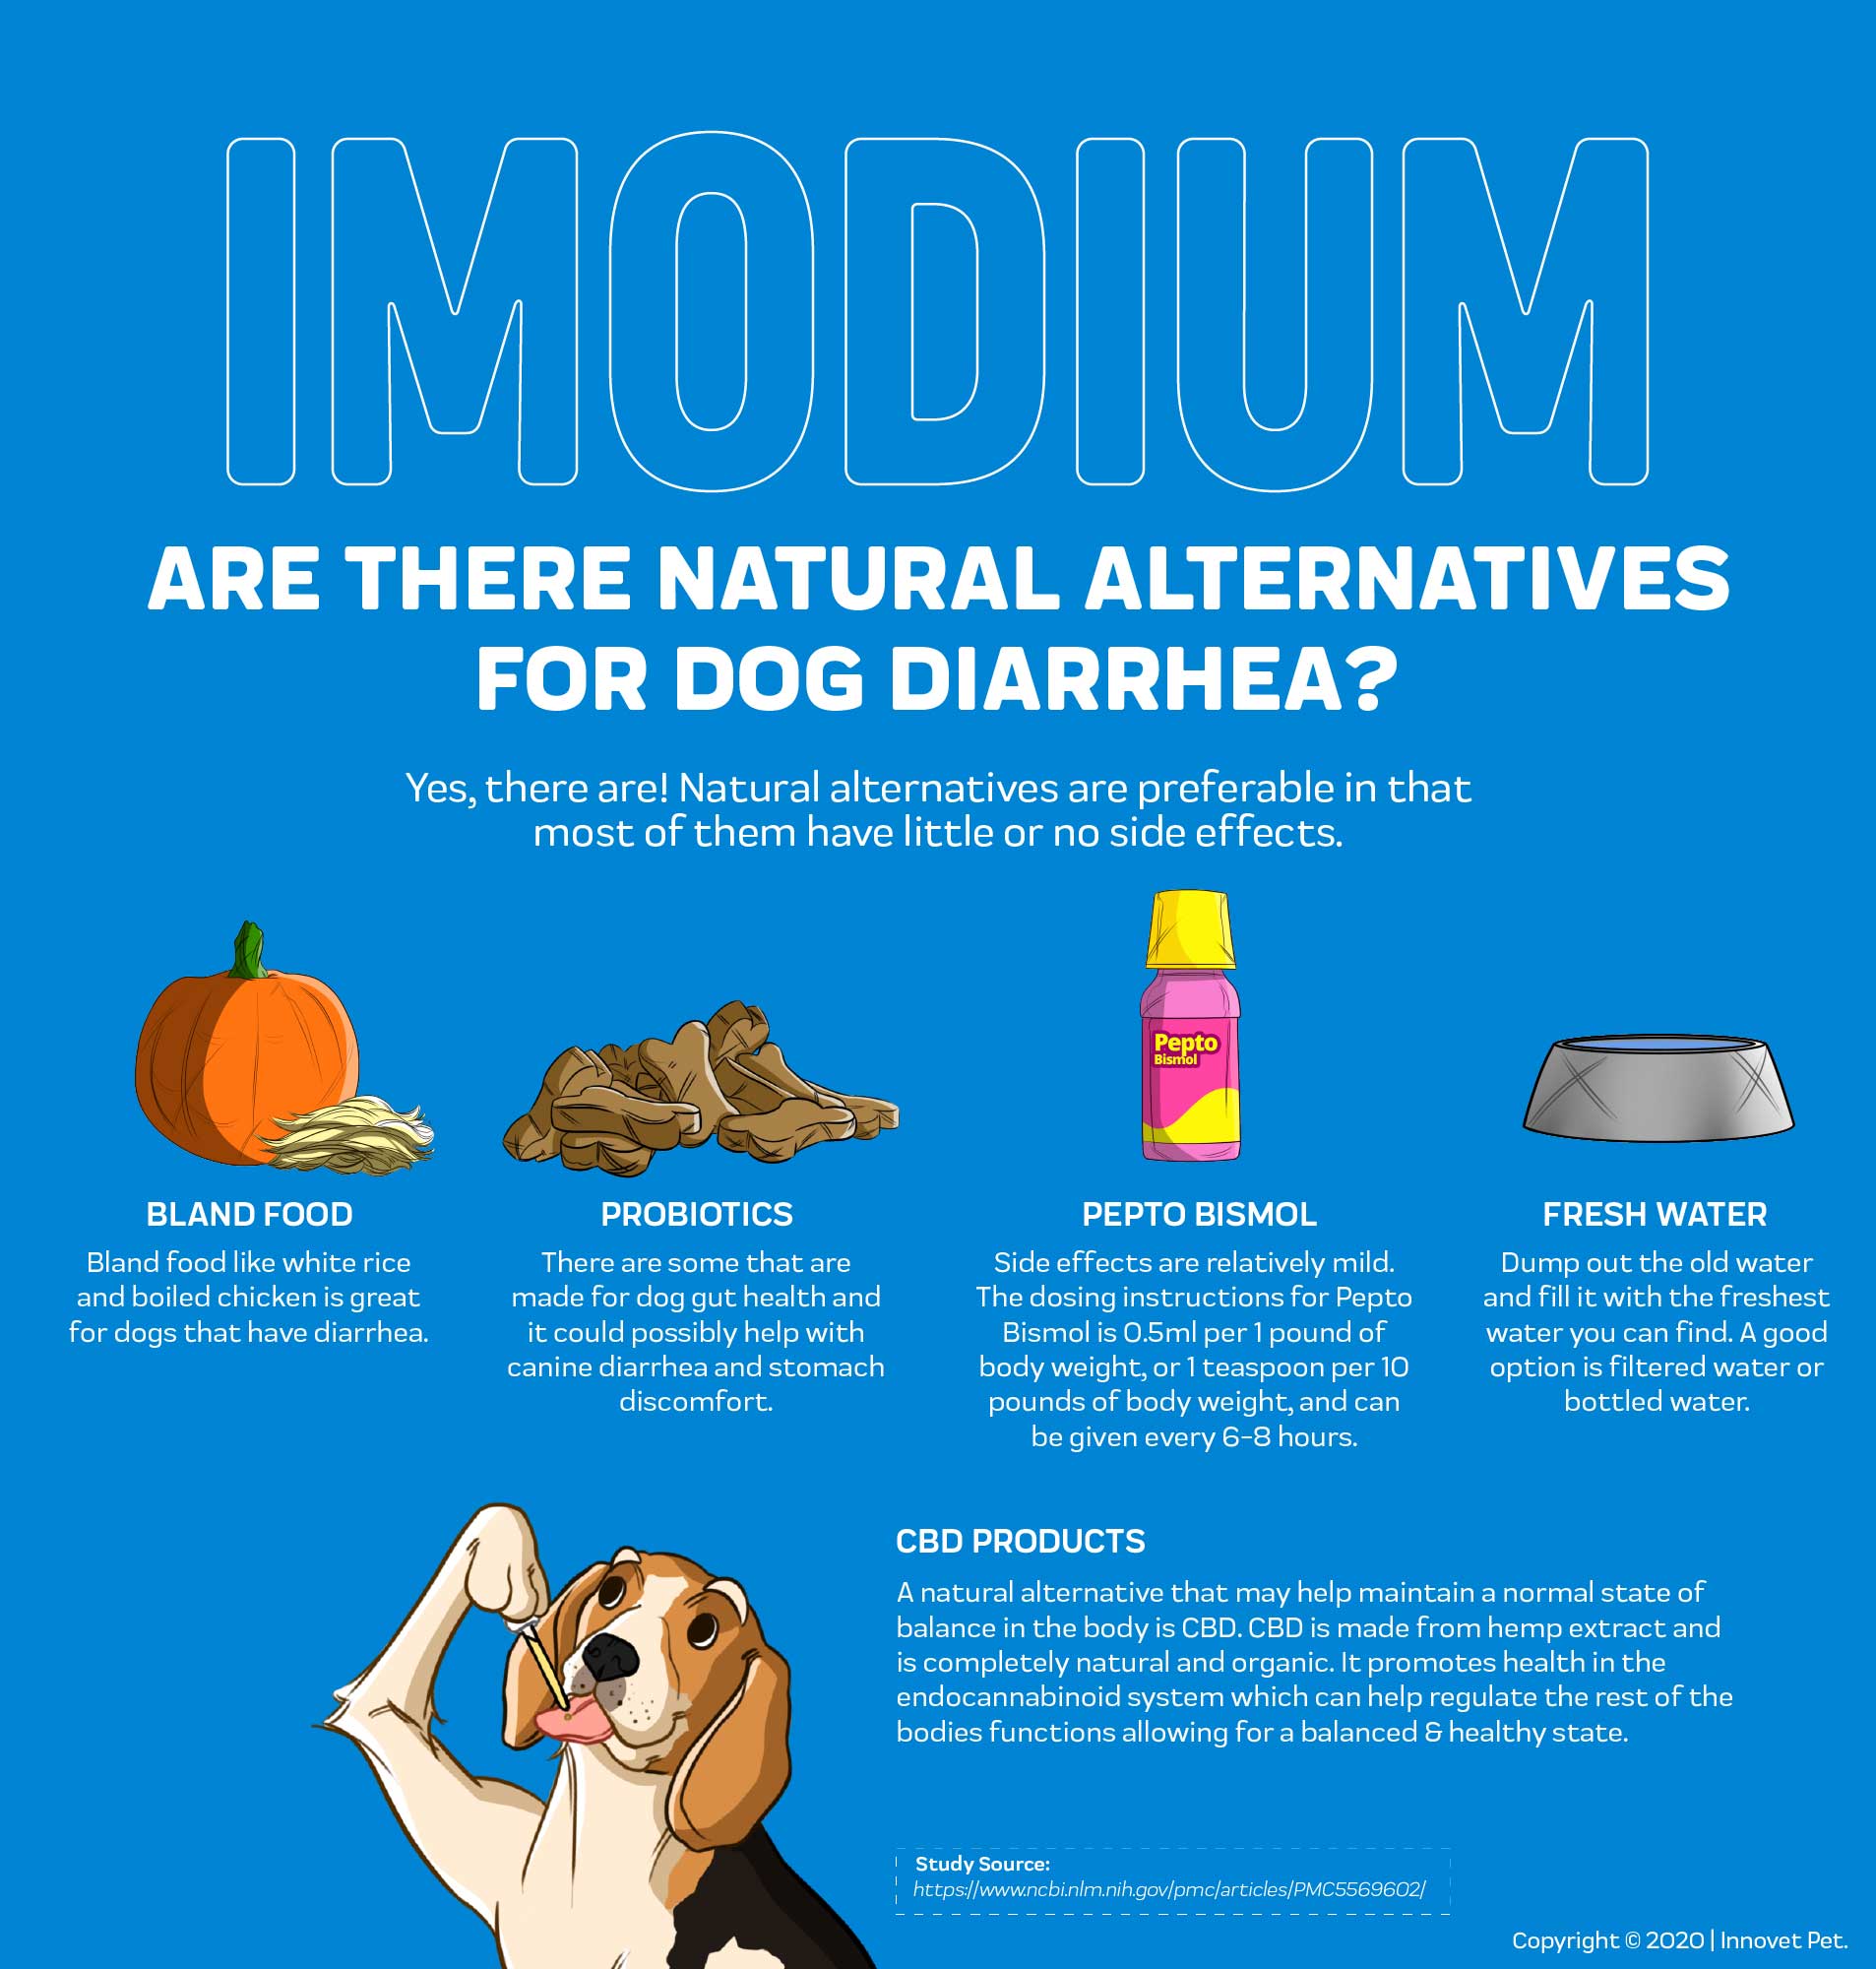 can-i-give-imodium-to-dogs